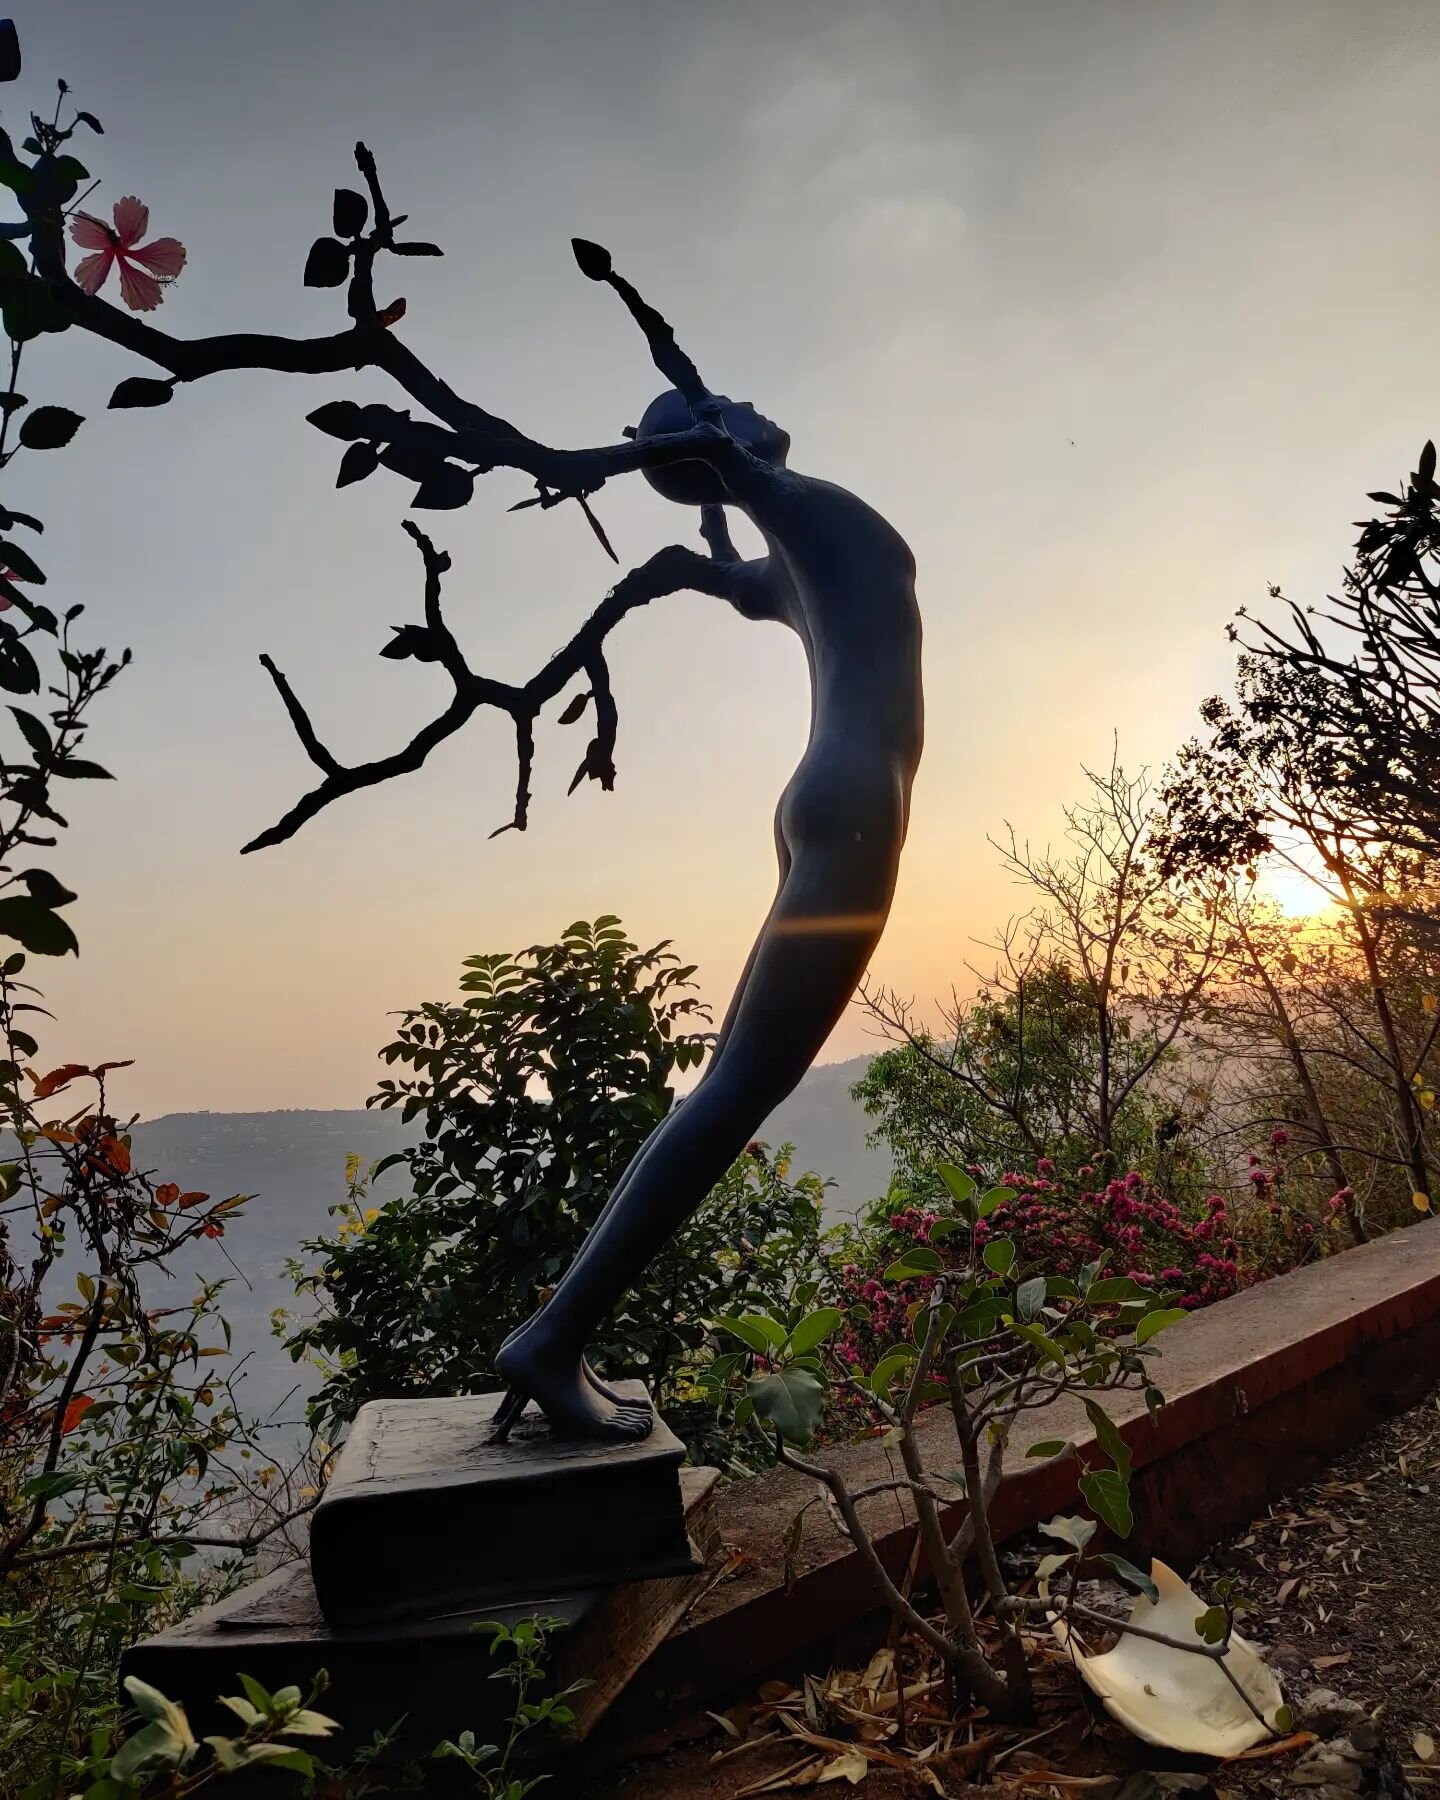 Let's strech our arms to embrace the earth and the sky!

#devraiartvillage #sunset #sculptureart #gardendesign #treeoflife #takingcare #takingoff#AtmanirbharBharat #Panchgani